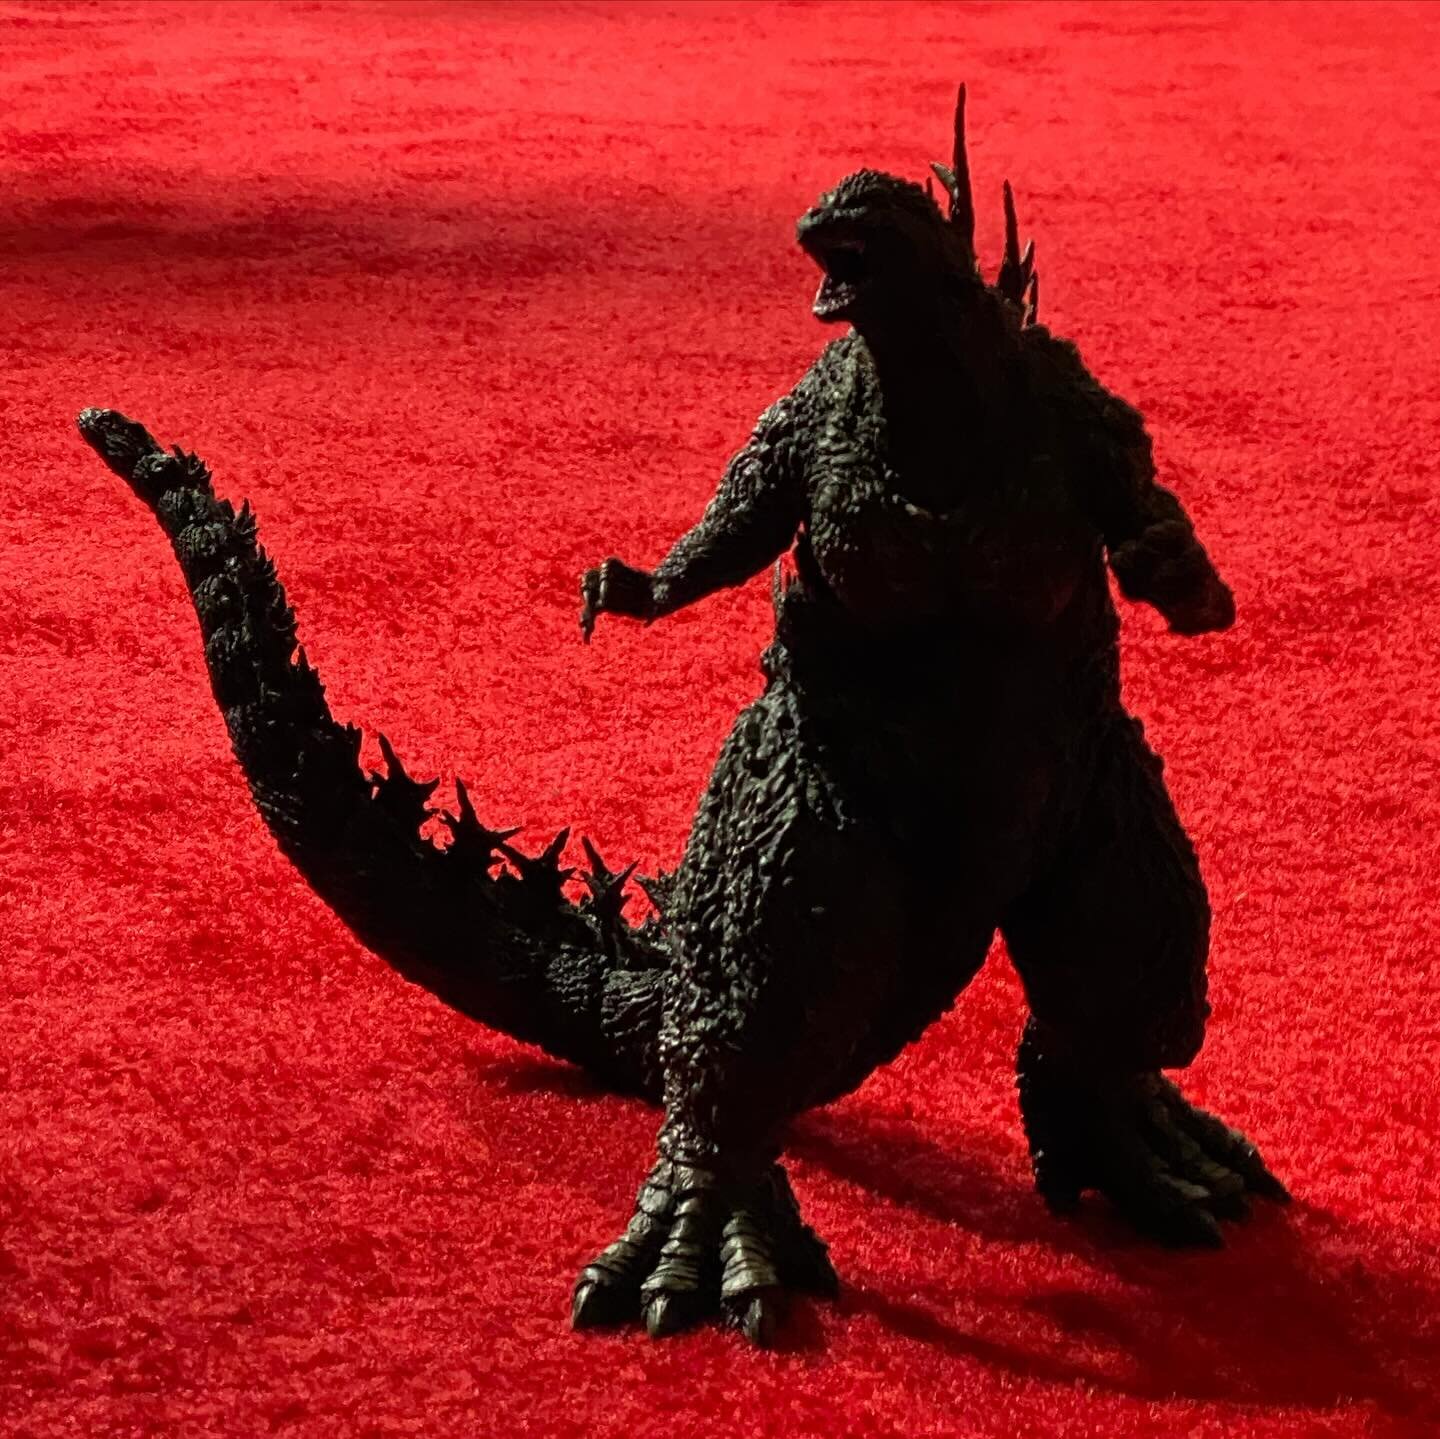 OSCAR WINNERS.

Congratulations to Takashi Yamazaki and the Godzilla Minus One team on receiving Best Visual Effects at The Oscars. So incredibly deserved. So proud to be a fan of this franchise.